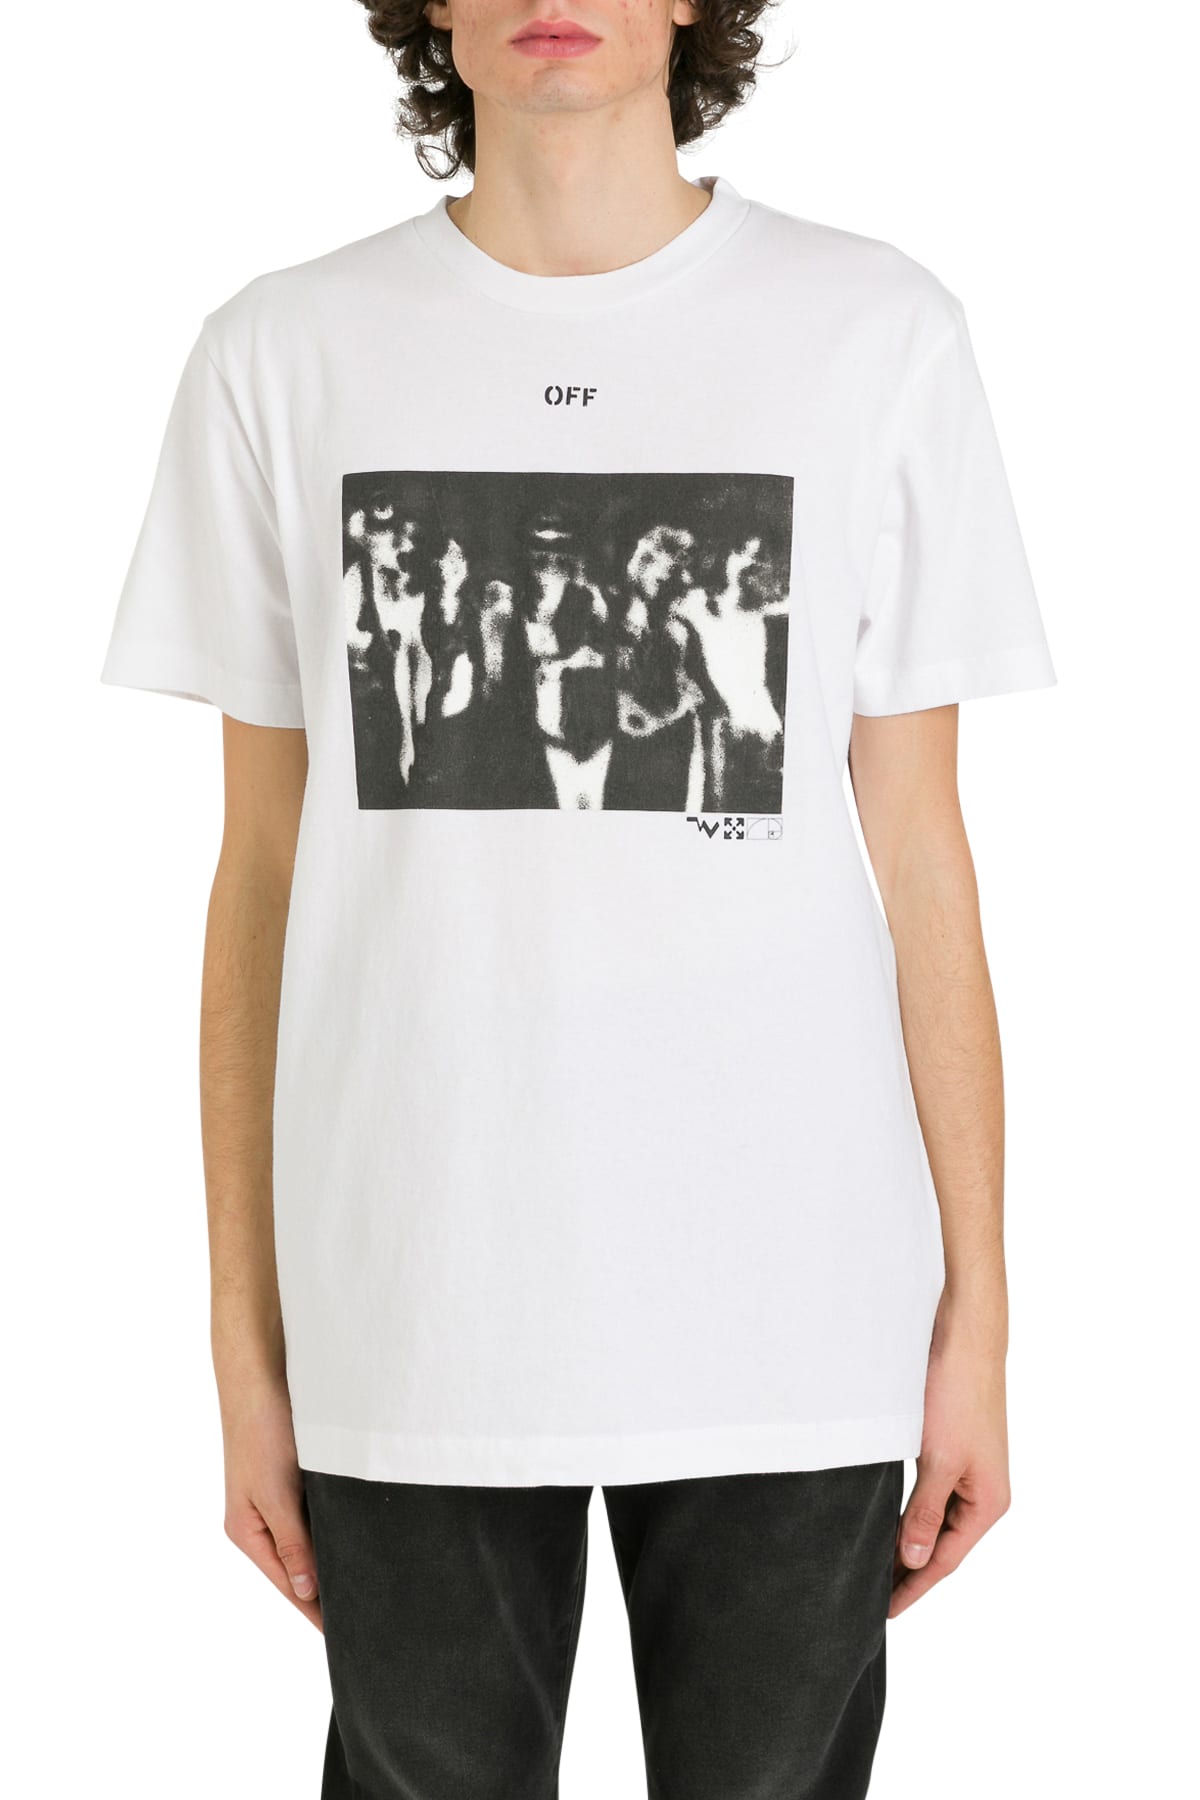 OFF-WHITE SPRAY PAINTING T-SHIRT,11212434